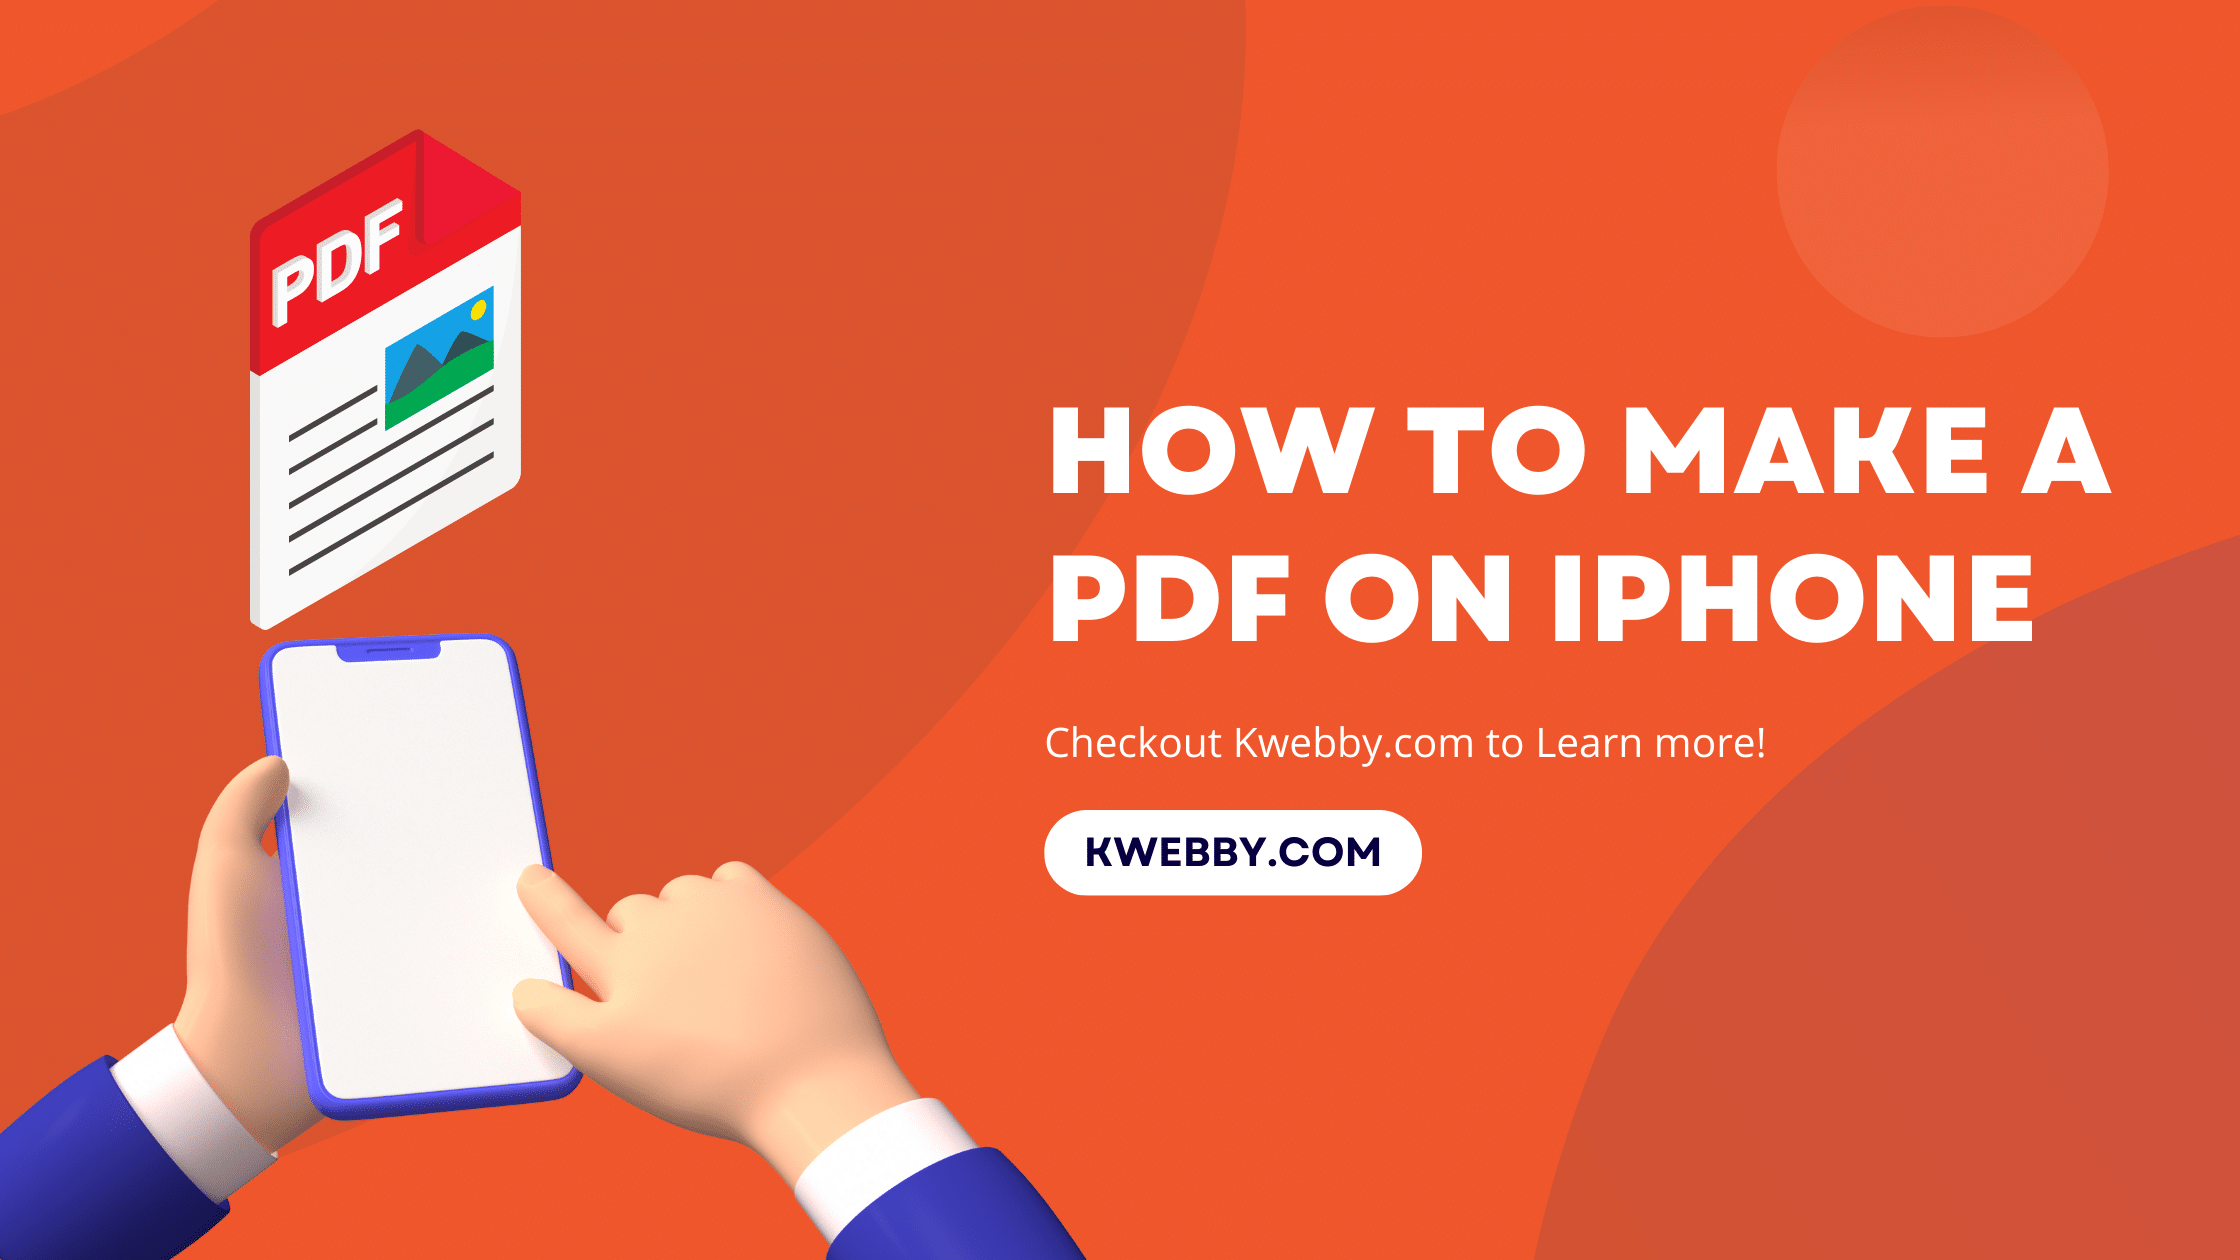 How to Make a PDF on iPhone